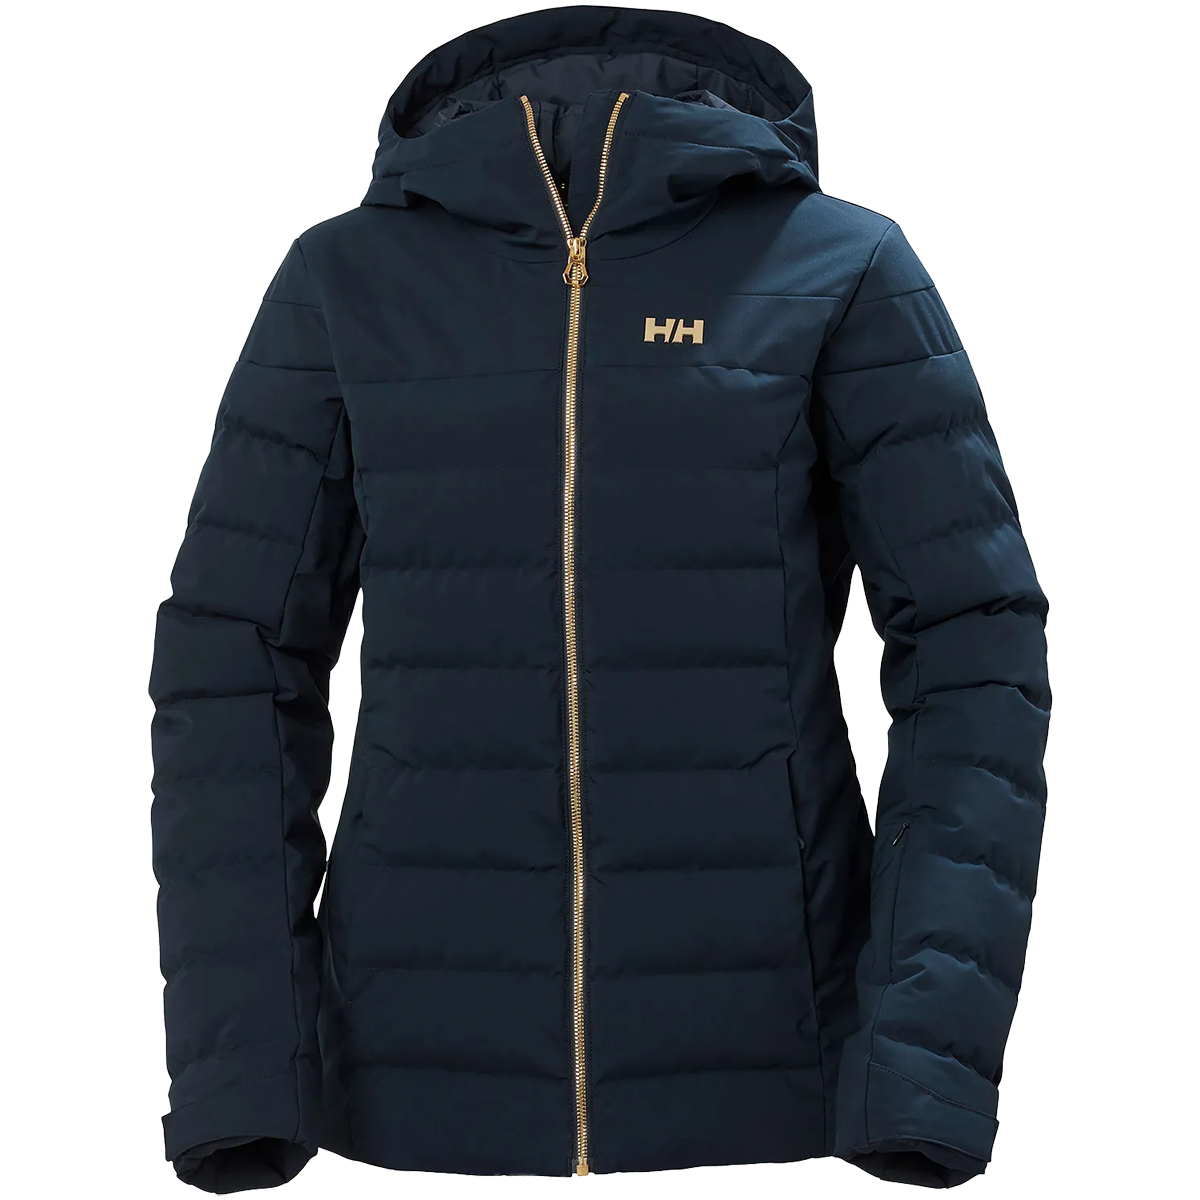 Women's Imperial Puffy Jacket alternate view